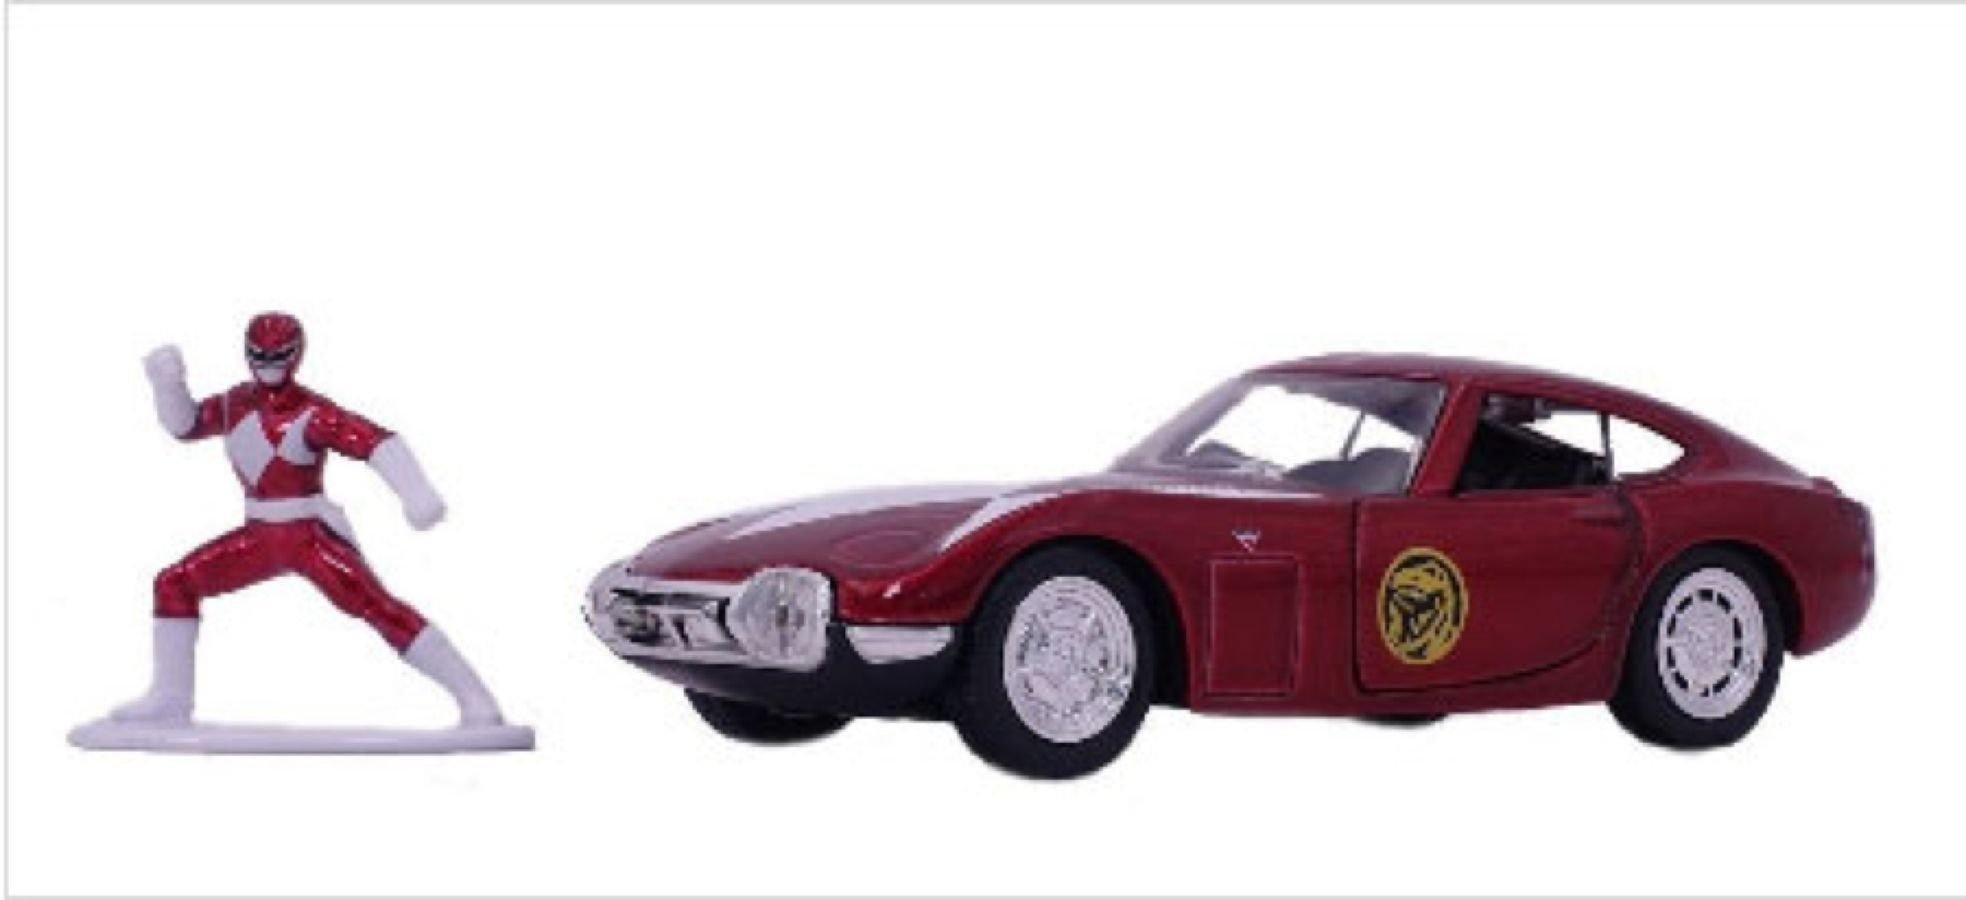 JAD33074 Power Rangers - 1967 Toyota 2000 GT with Red Ranger 1:32 Scale Hollywood Ride - Jada Toys - Titan Pop Culture